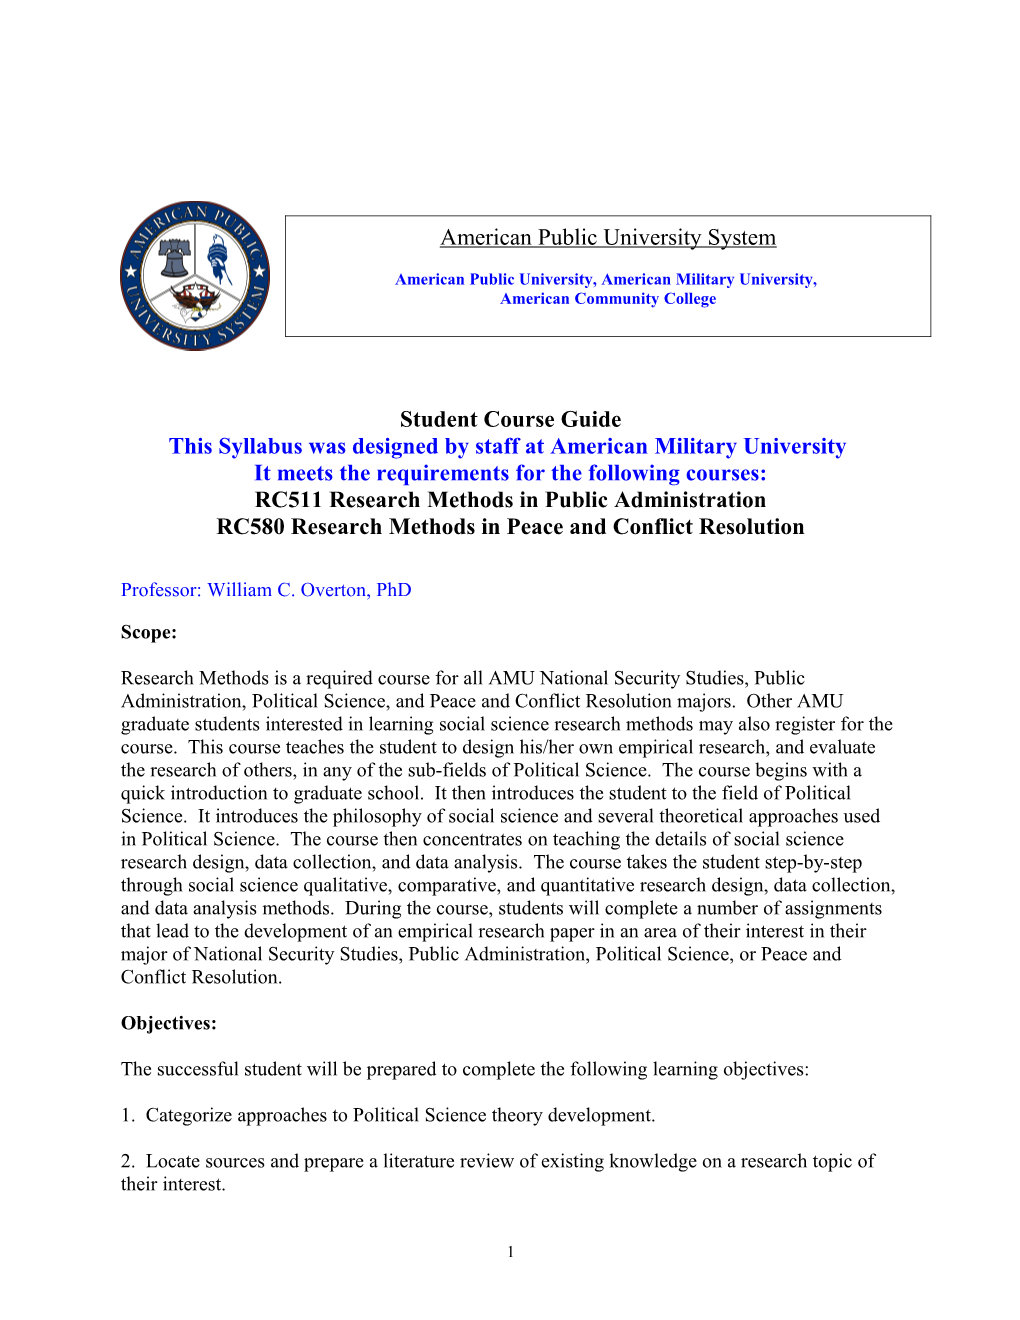 RC503 - Research Methods in National Security Studies